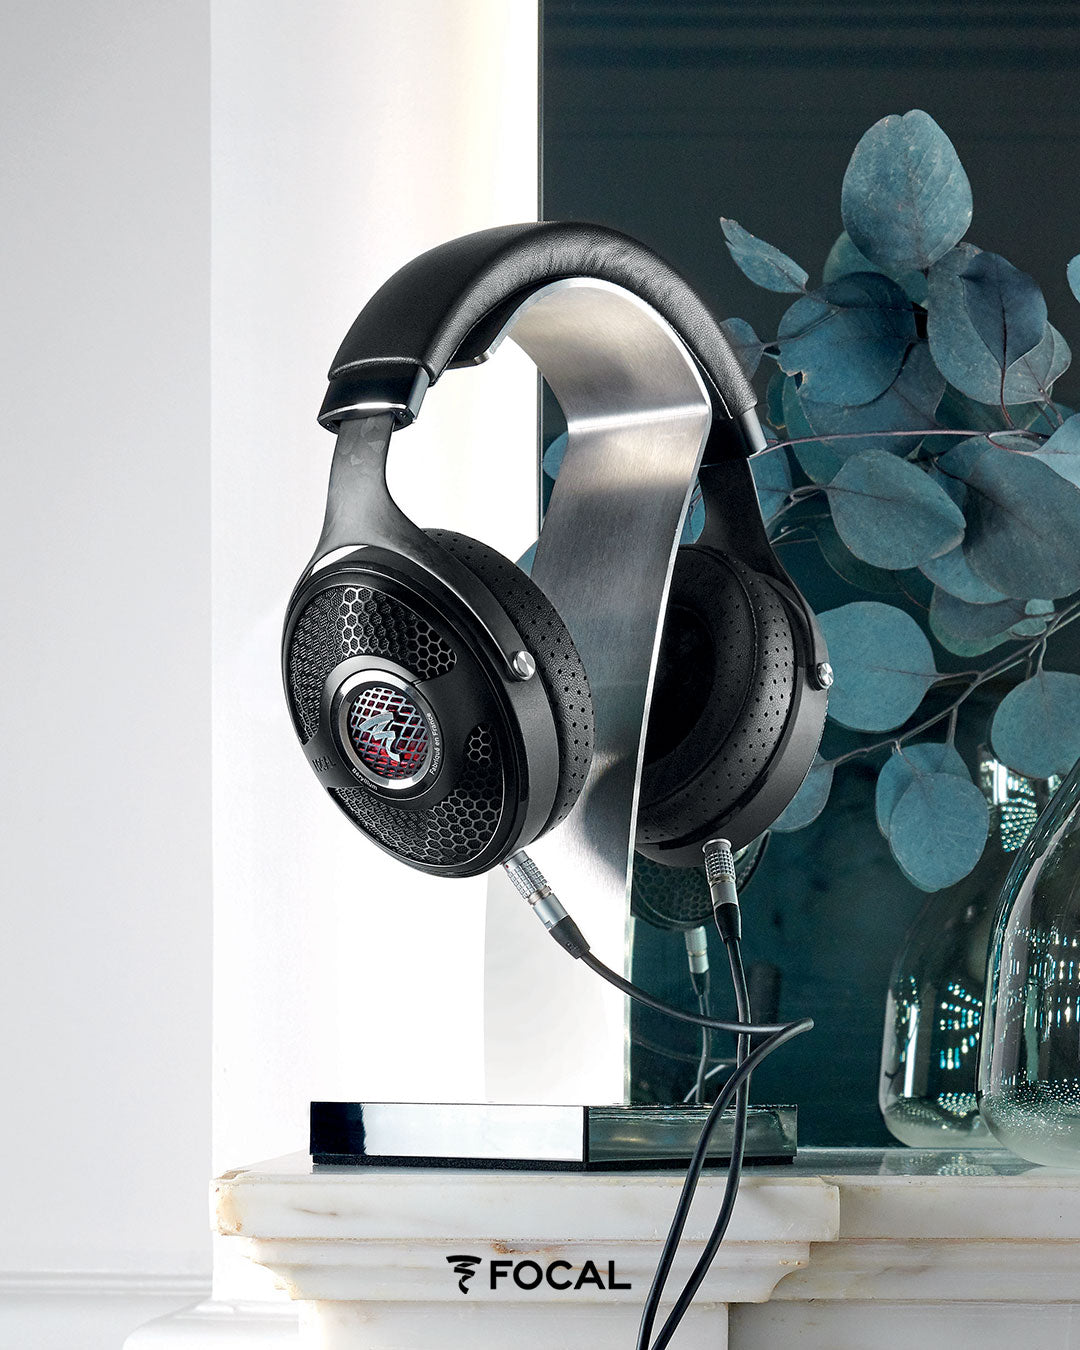 New focal utopia picture on headphone stand